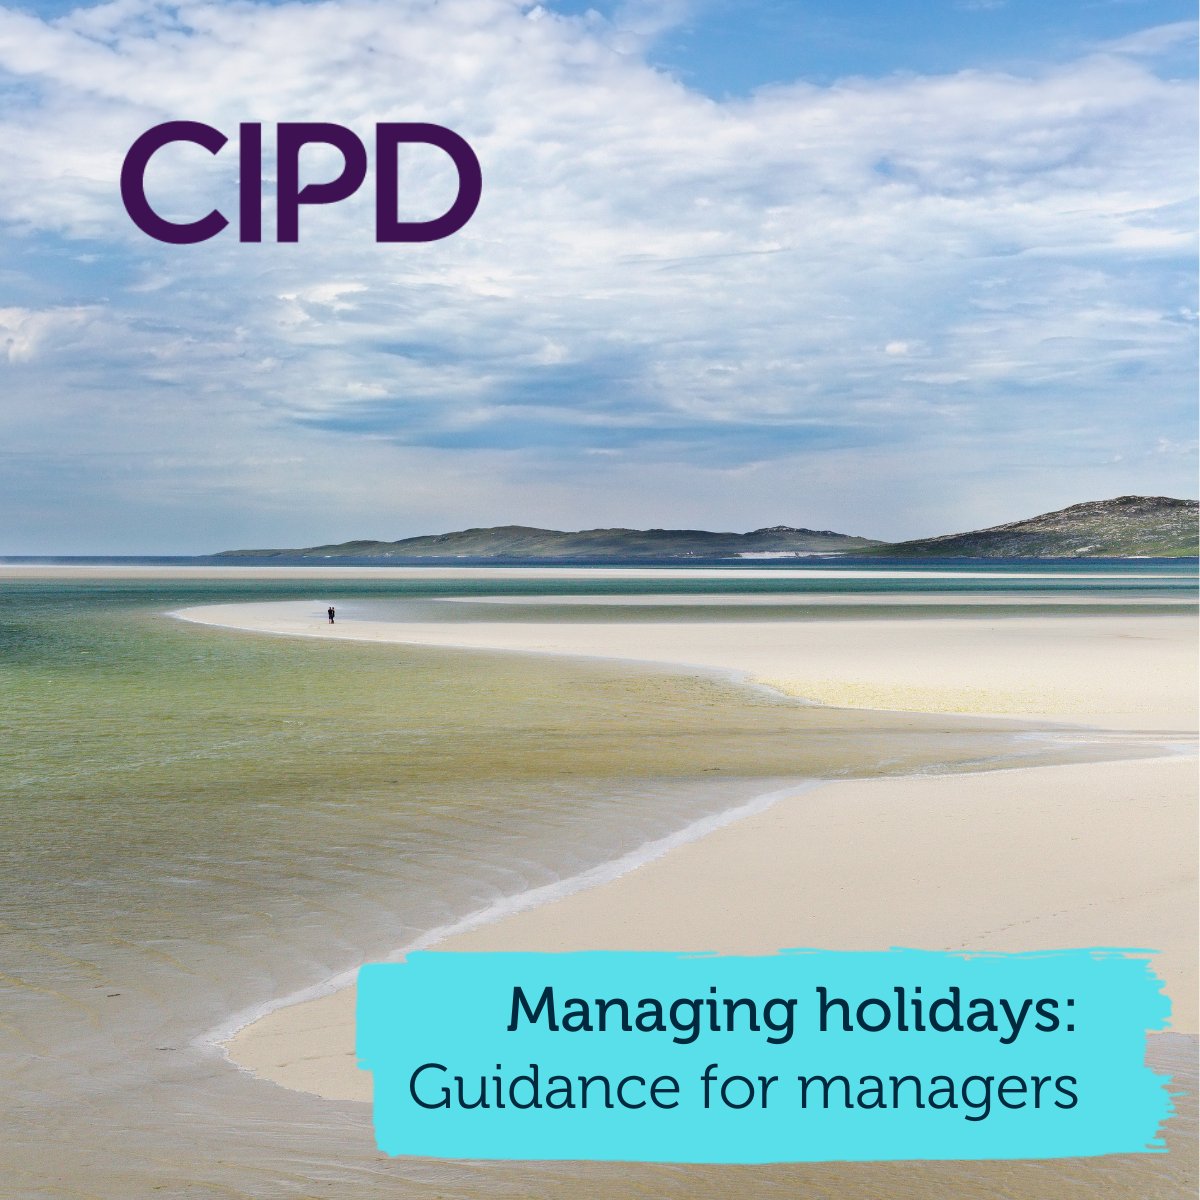 With holiday requests starting to ramp up, we thought it would be a good time to share our guidance for CIPD members on managing holidays in your team, so you can manage leave in a fair and consistent way.

Read it here: ow.ly/V6v750Rj7NA

#HR #peopleprofession